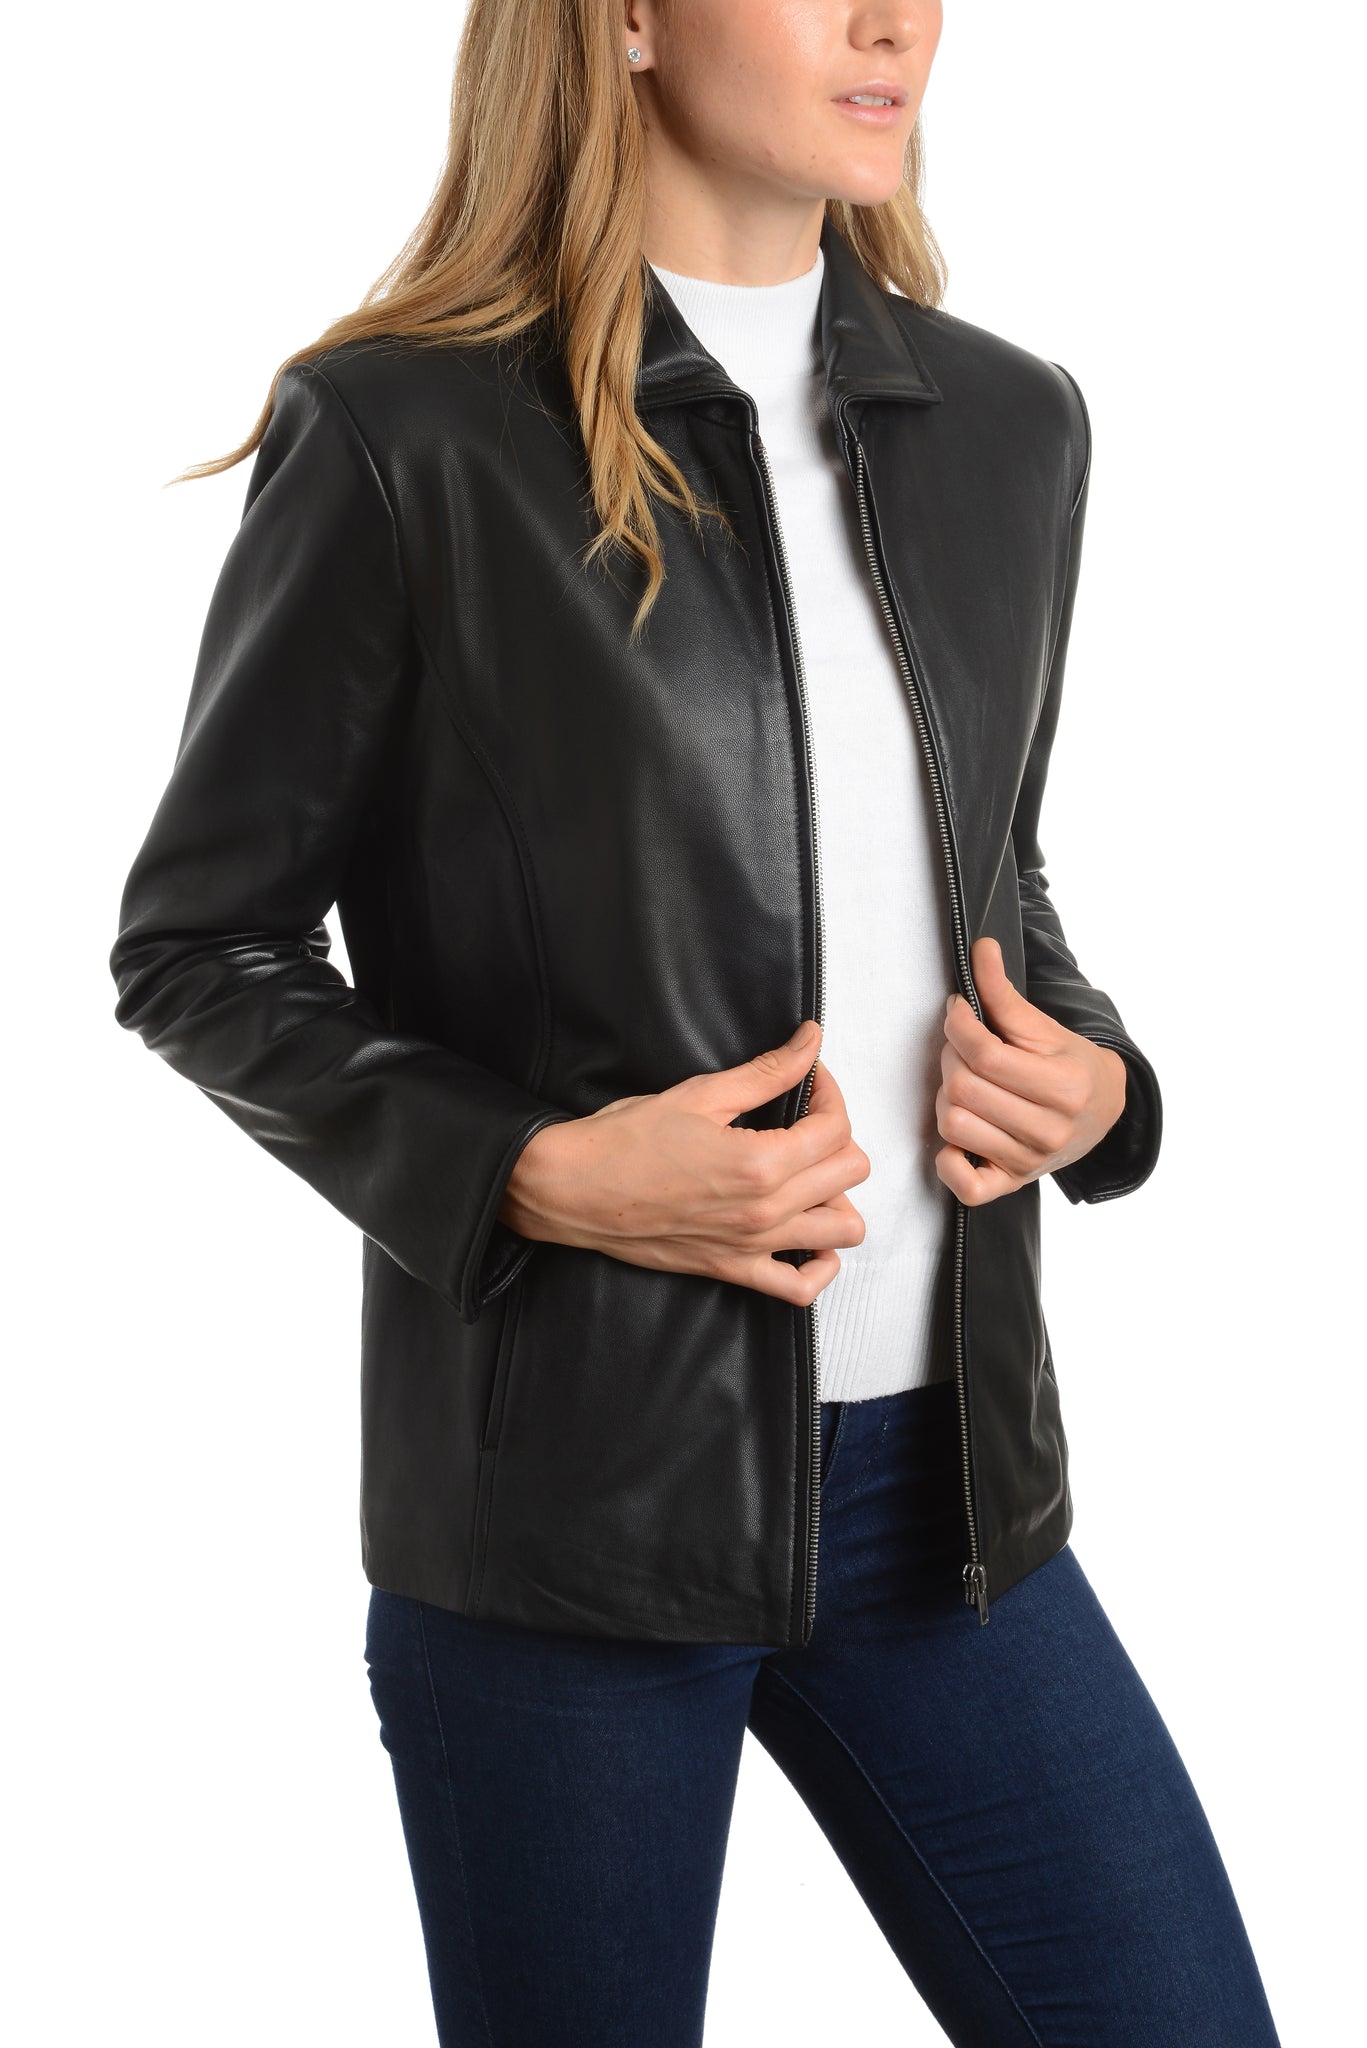 Leather Ladies Jacket at Rs 3800